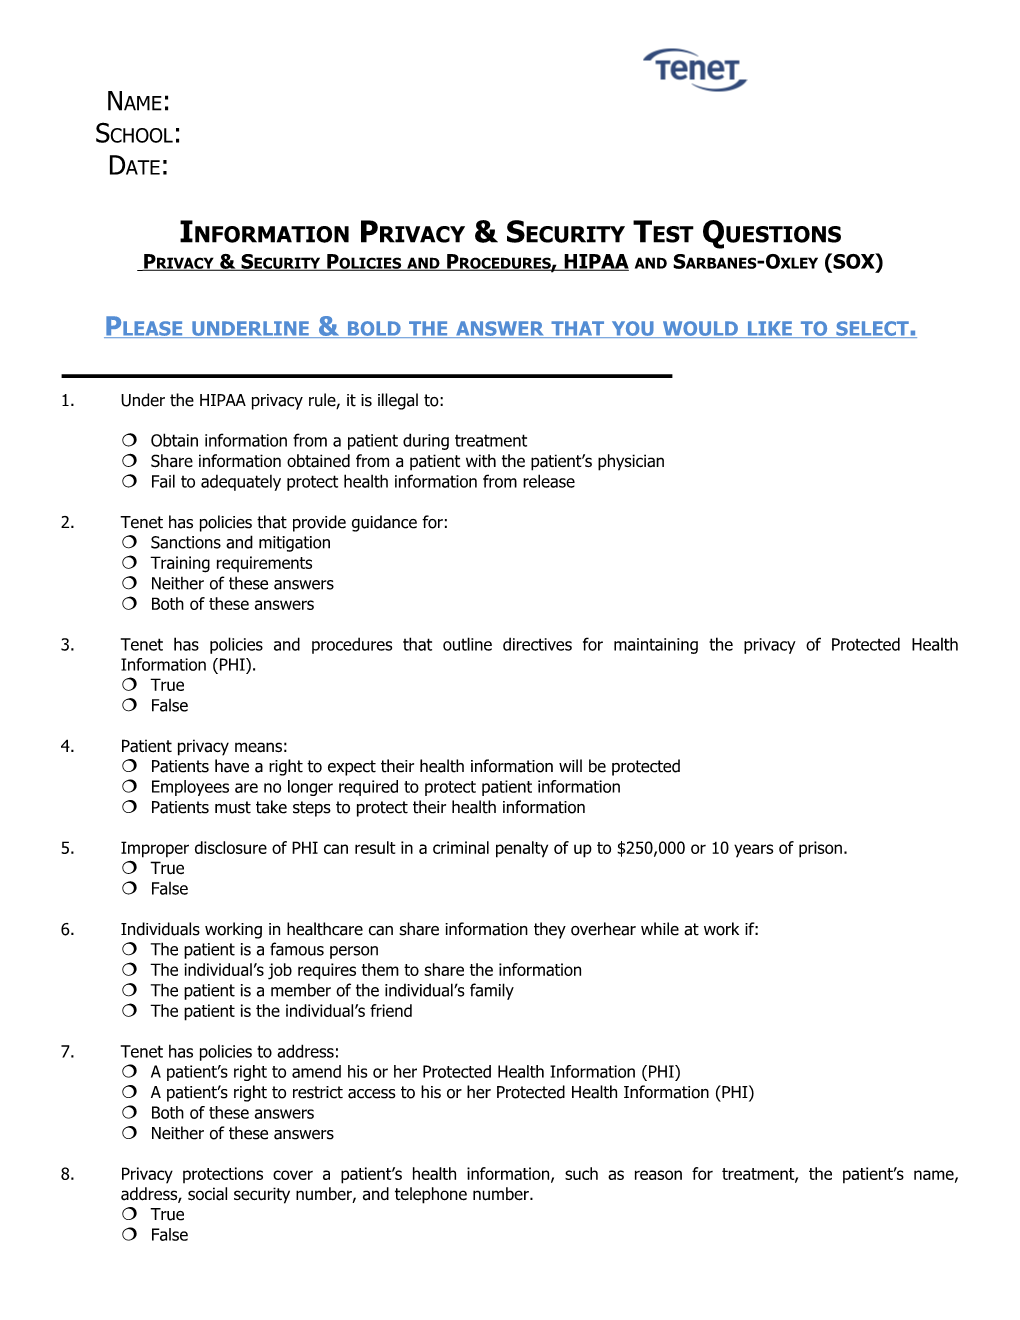 Information Privacy & Security Test Questions